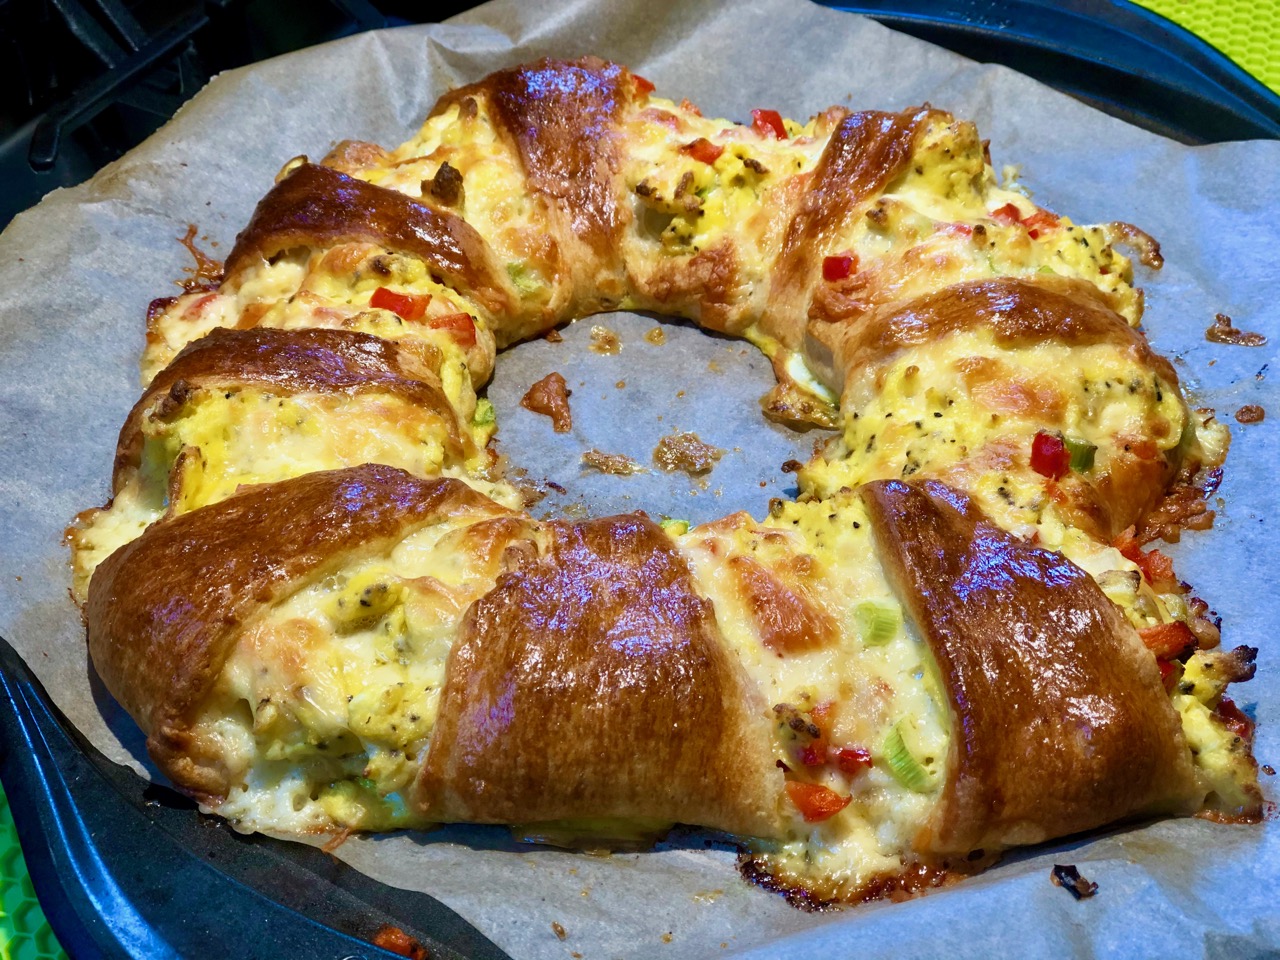 https://travelswithmaitaitom.com/wp-content/uploads/2021/05/Scrambled-Eggs-Bacon-and-Cheddar-Breakfast-Crescent-Roll-Ring0A-1-3.jpg